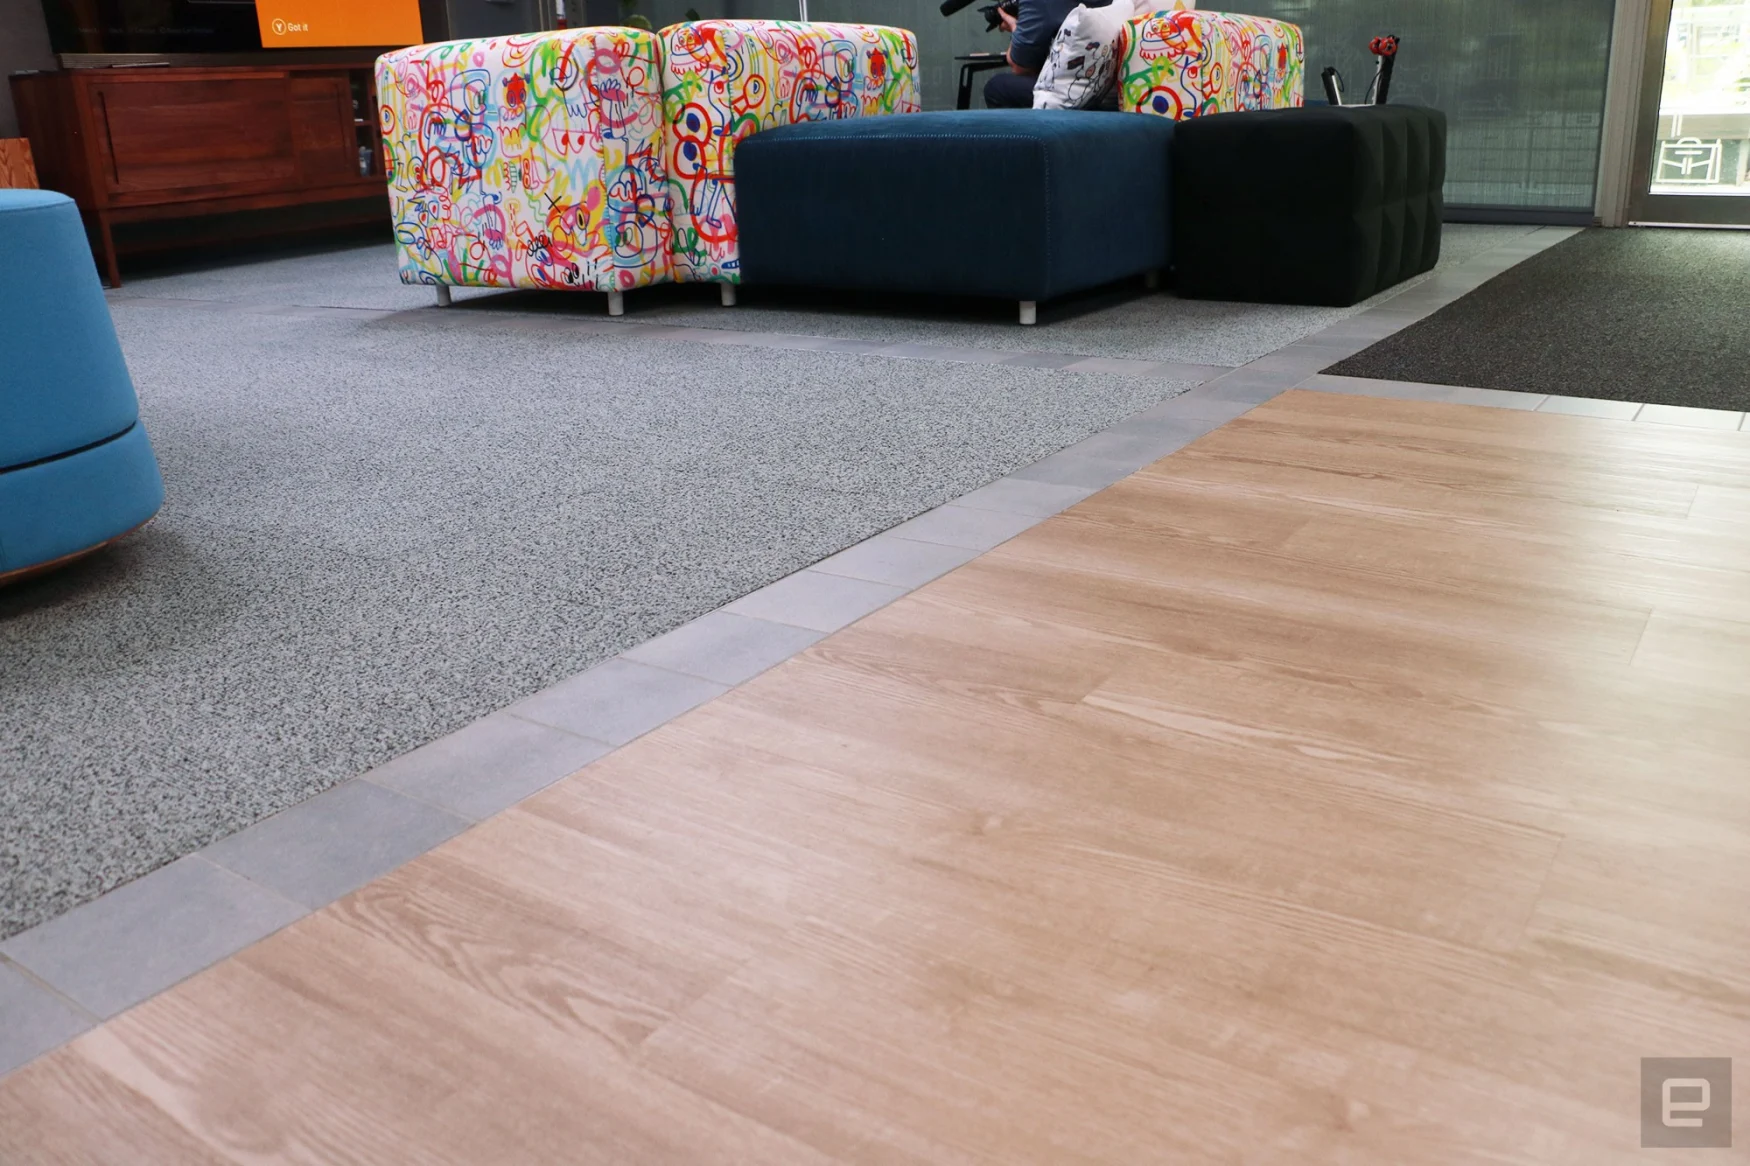 A shot of the floors at Microsoft's new Inclusive Tech Lab, with a light wood section, gray carpet section and dark carpet section in the frame. The areas are separated by a light gray stone tile.